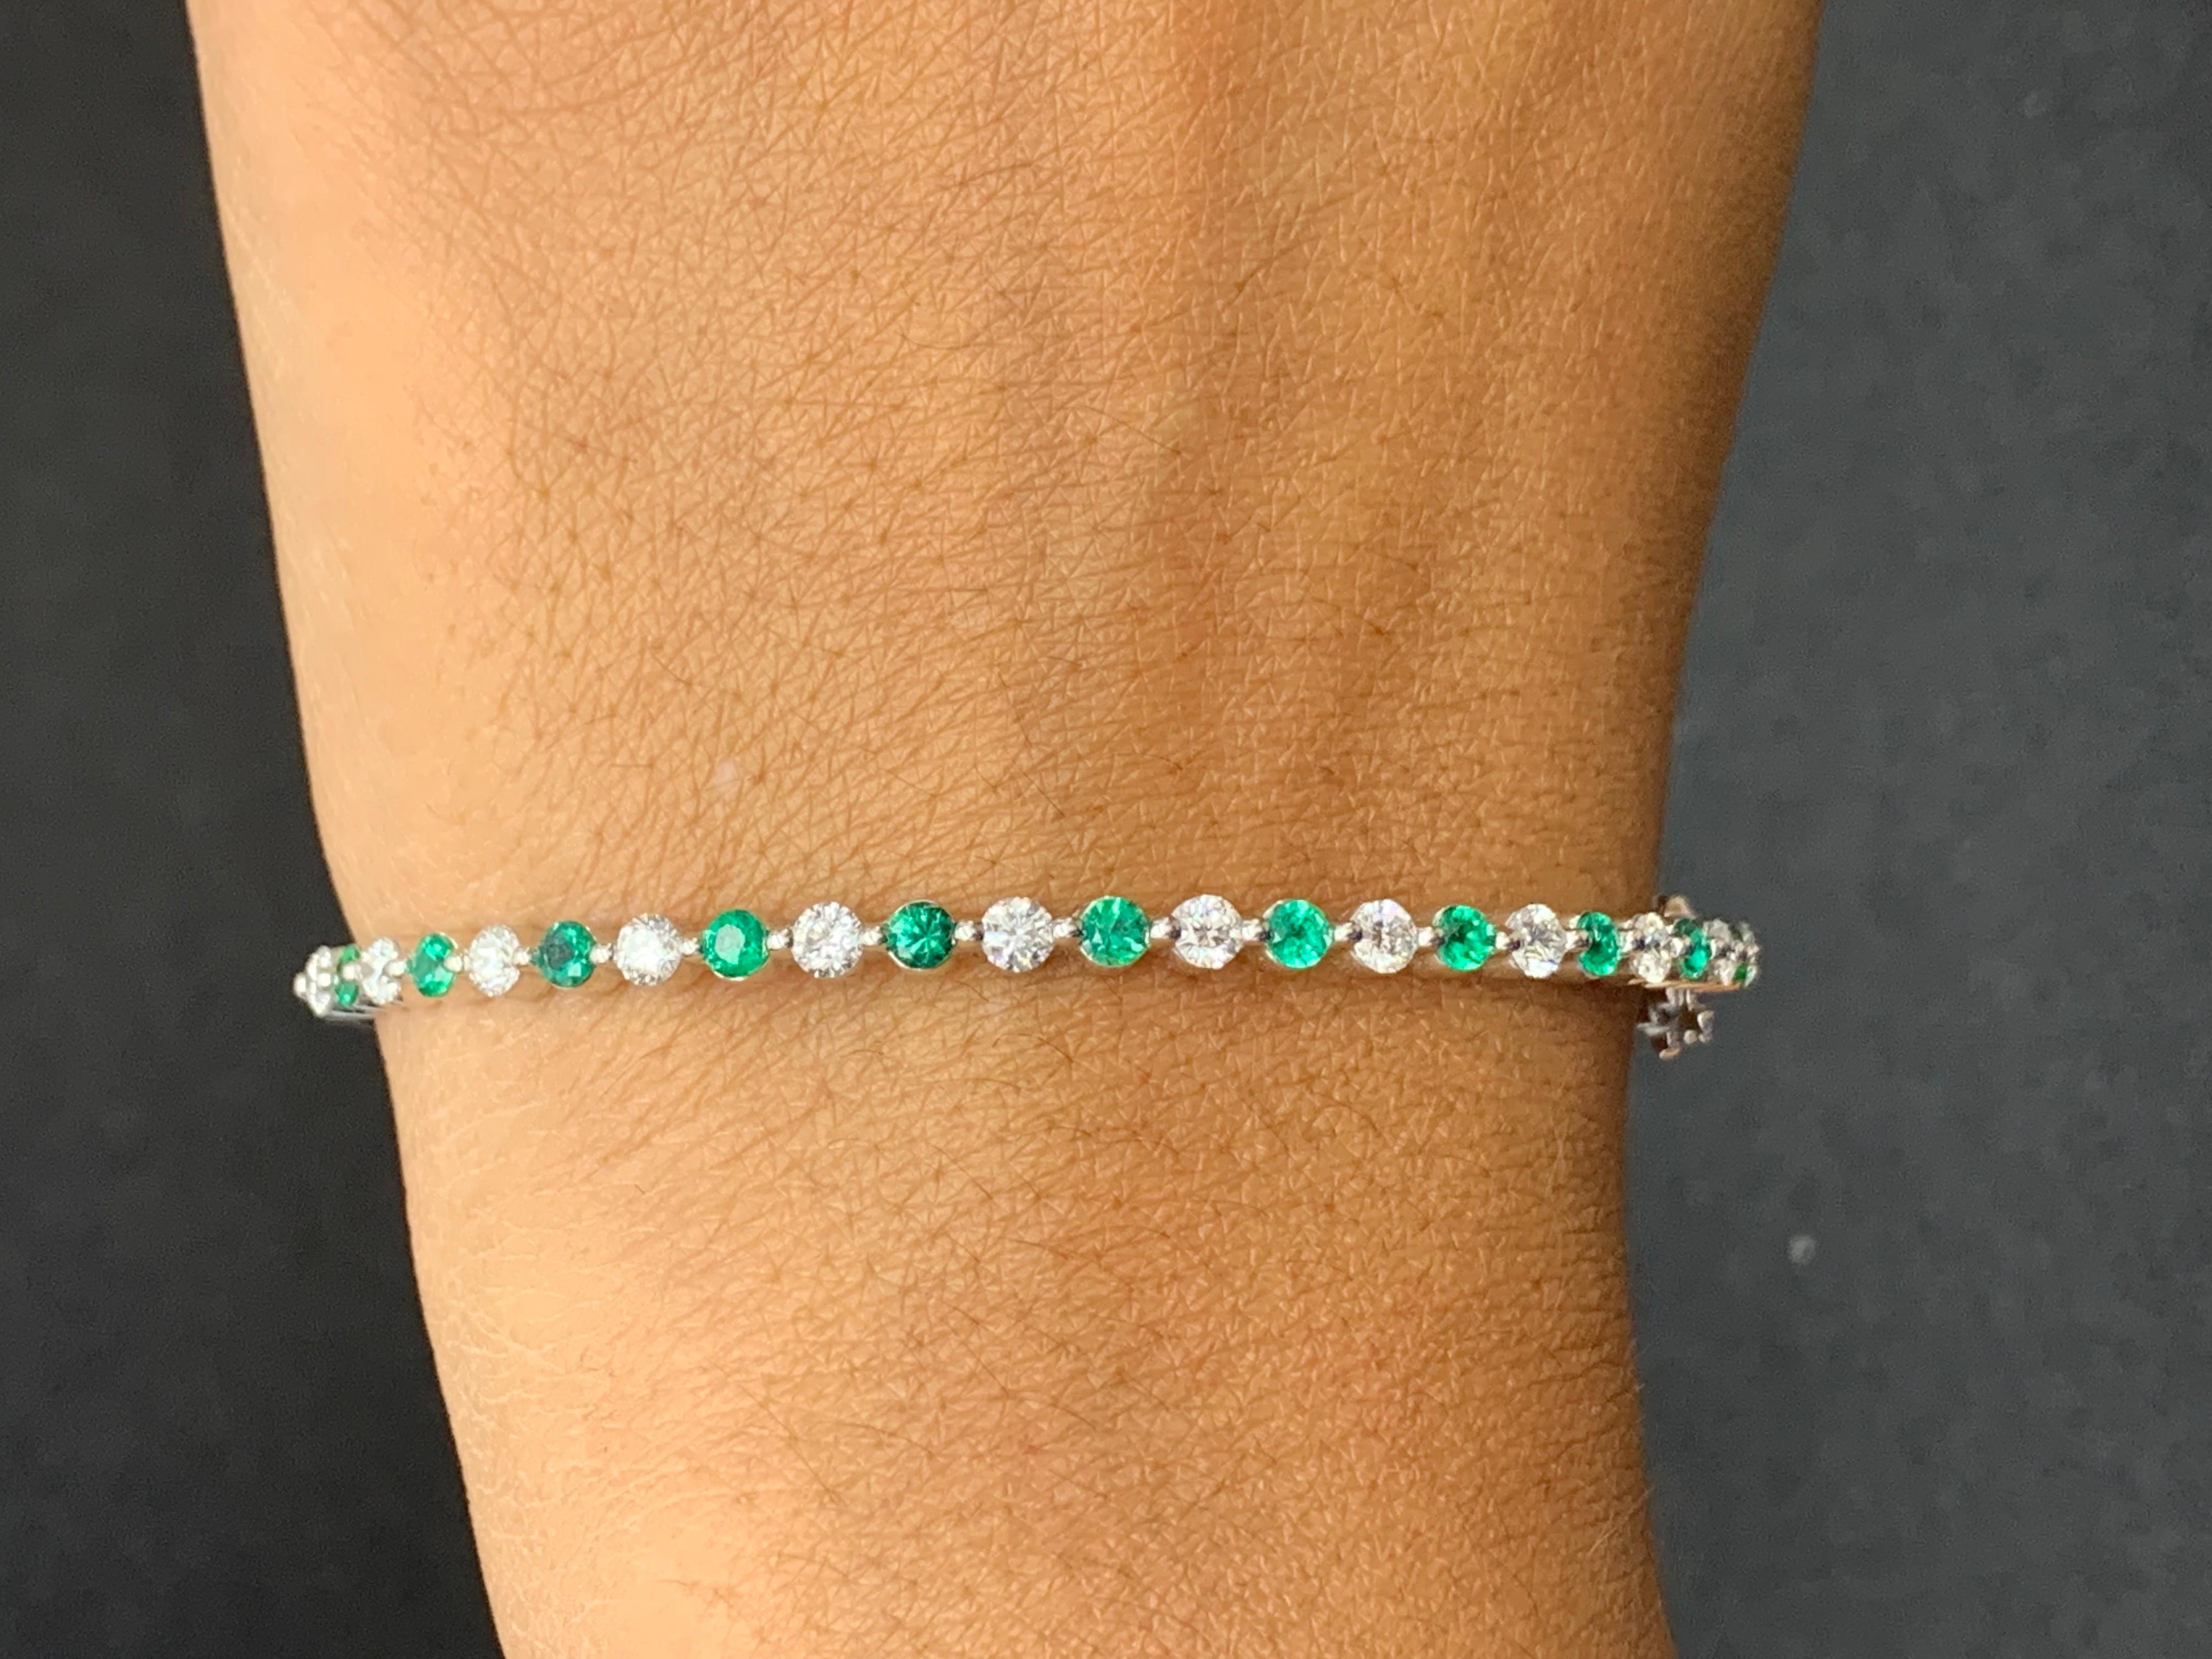 Sparkle in the spotlight with this Emerald and diamond bangle bracelet. Features 16 full-cut round emeralds weighing 2.33 carat and 15 diamonds weighing 0.40 carat. each elegantly set in a 14k white gold basket. . A hinged design bracelet for easy